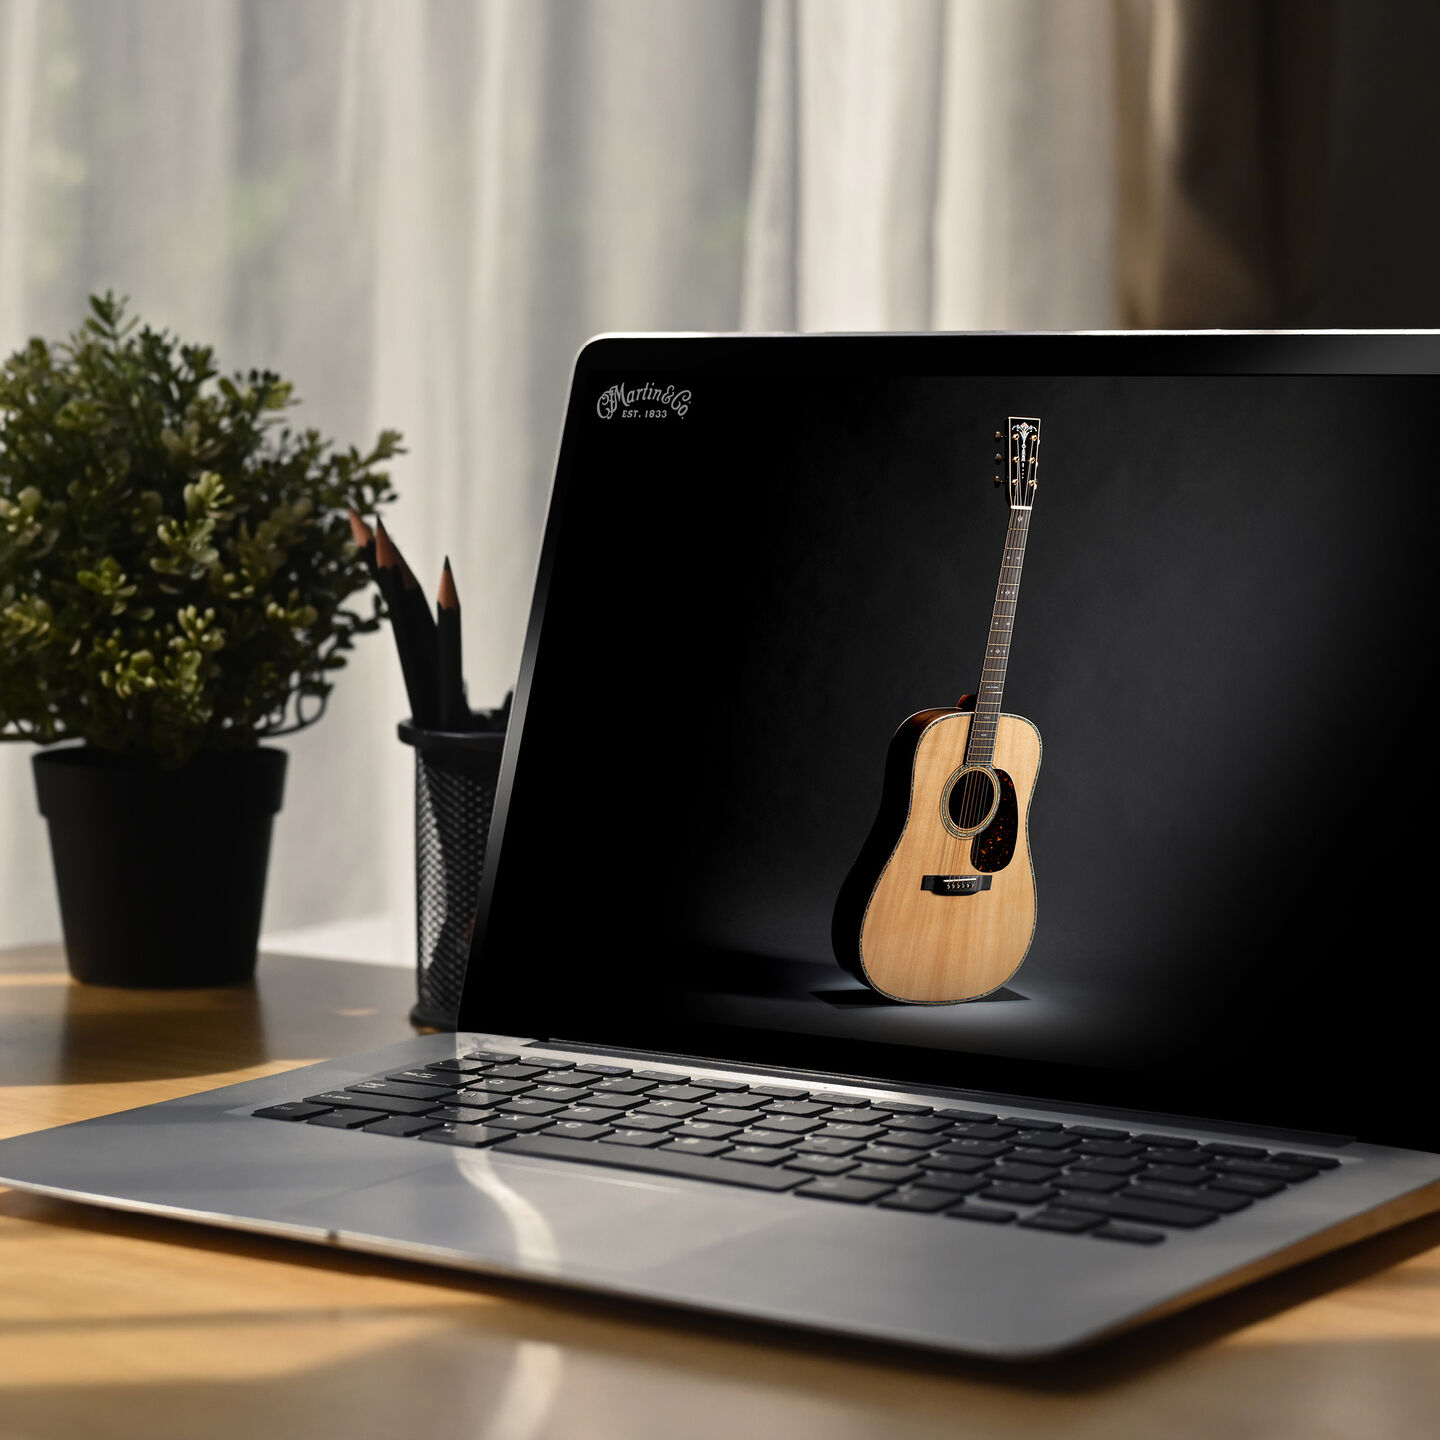 Photo of an acoustic guitar on an open laptop screen